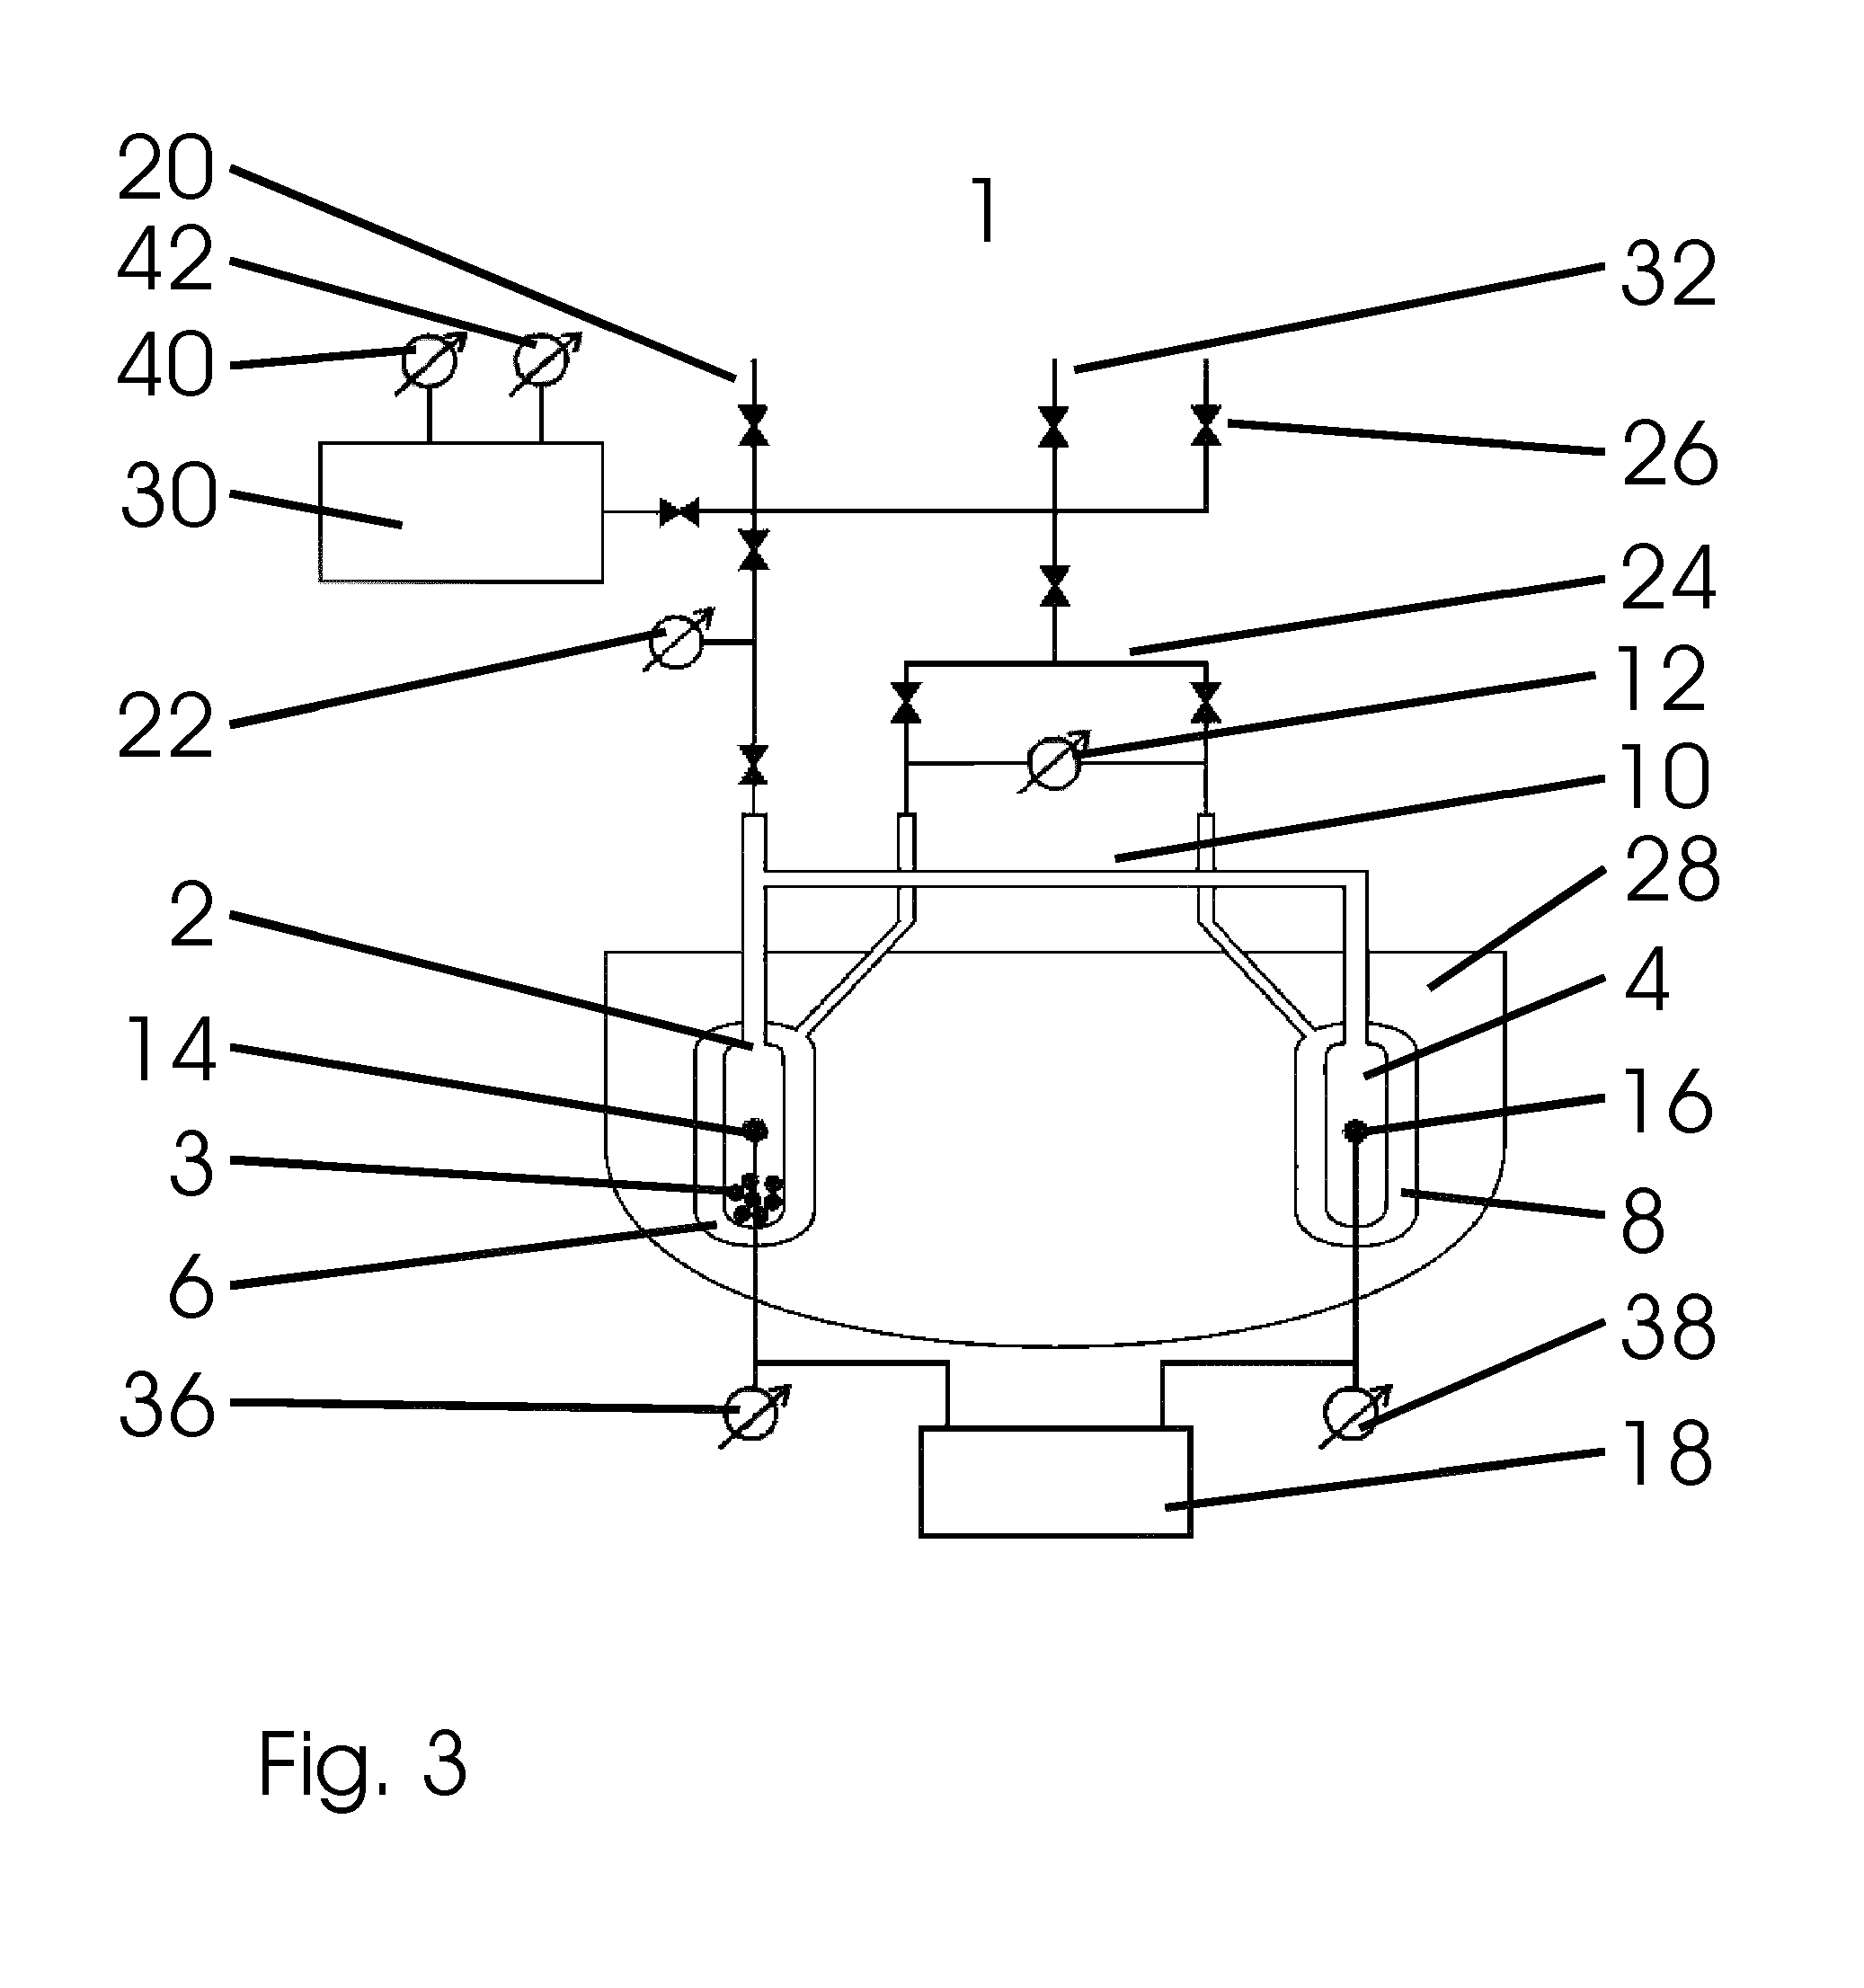 Device and Method for Calorimetrically Measuring Sorption Processes